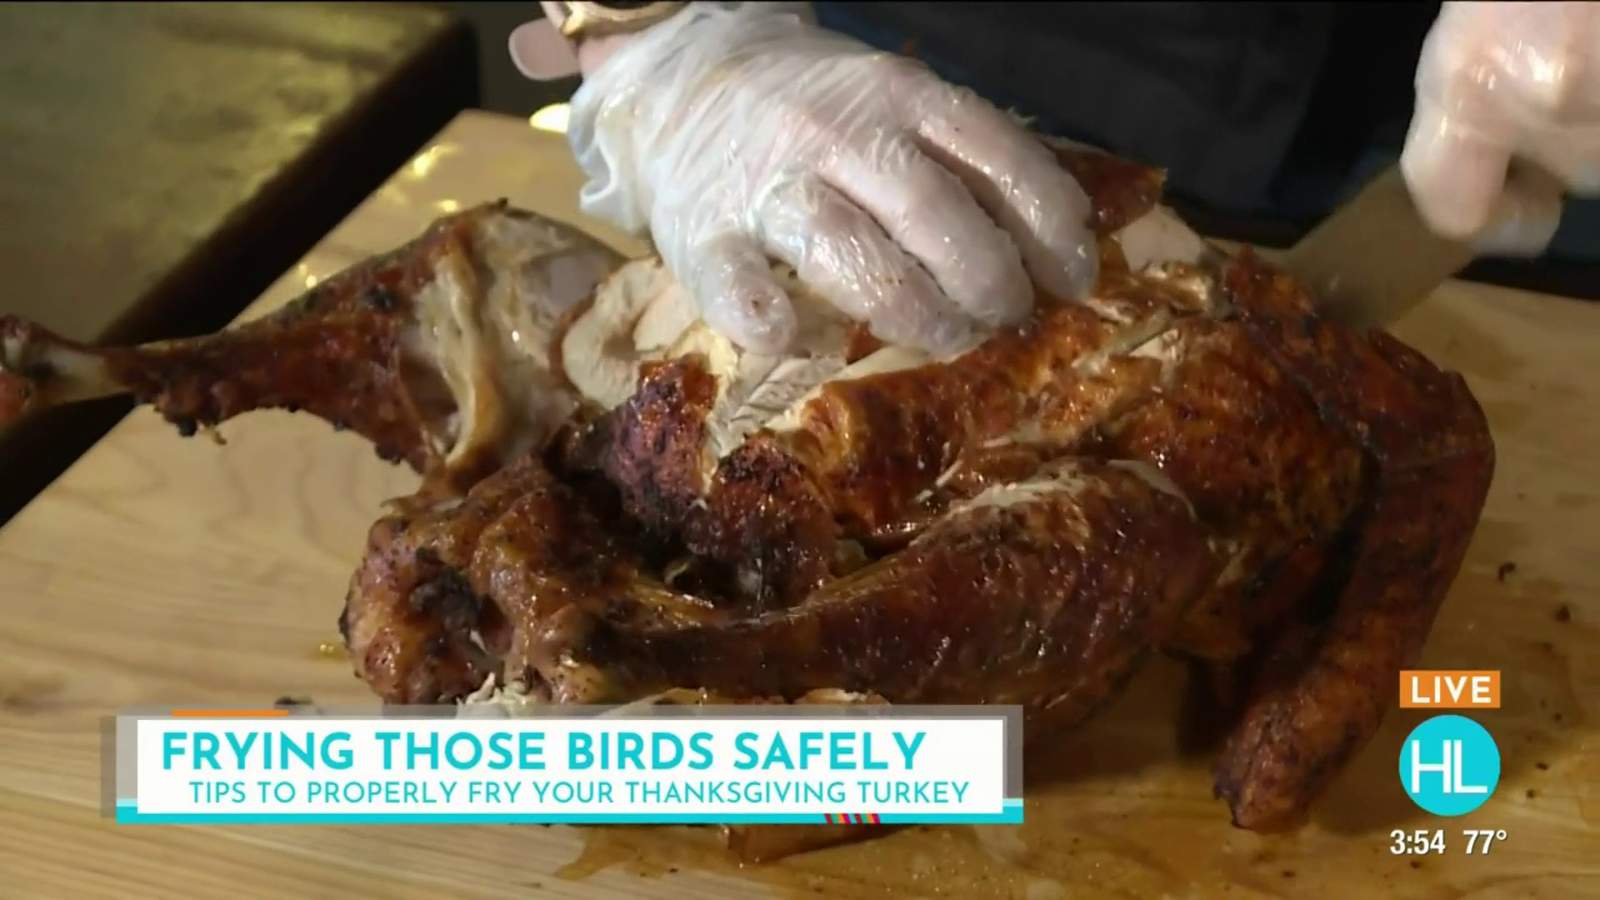 Frying your Thanksgiving turkey safely this holiday season